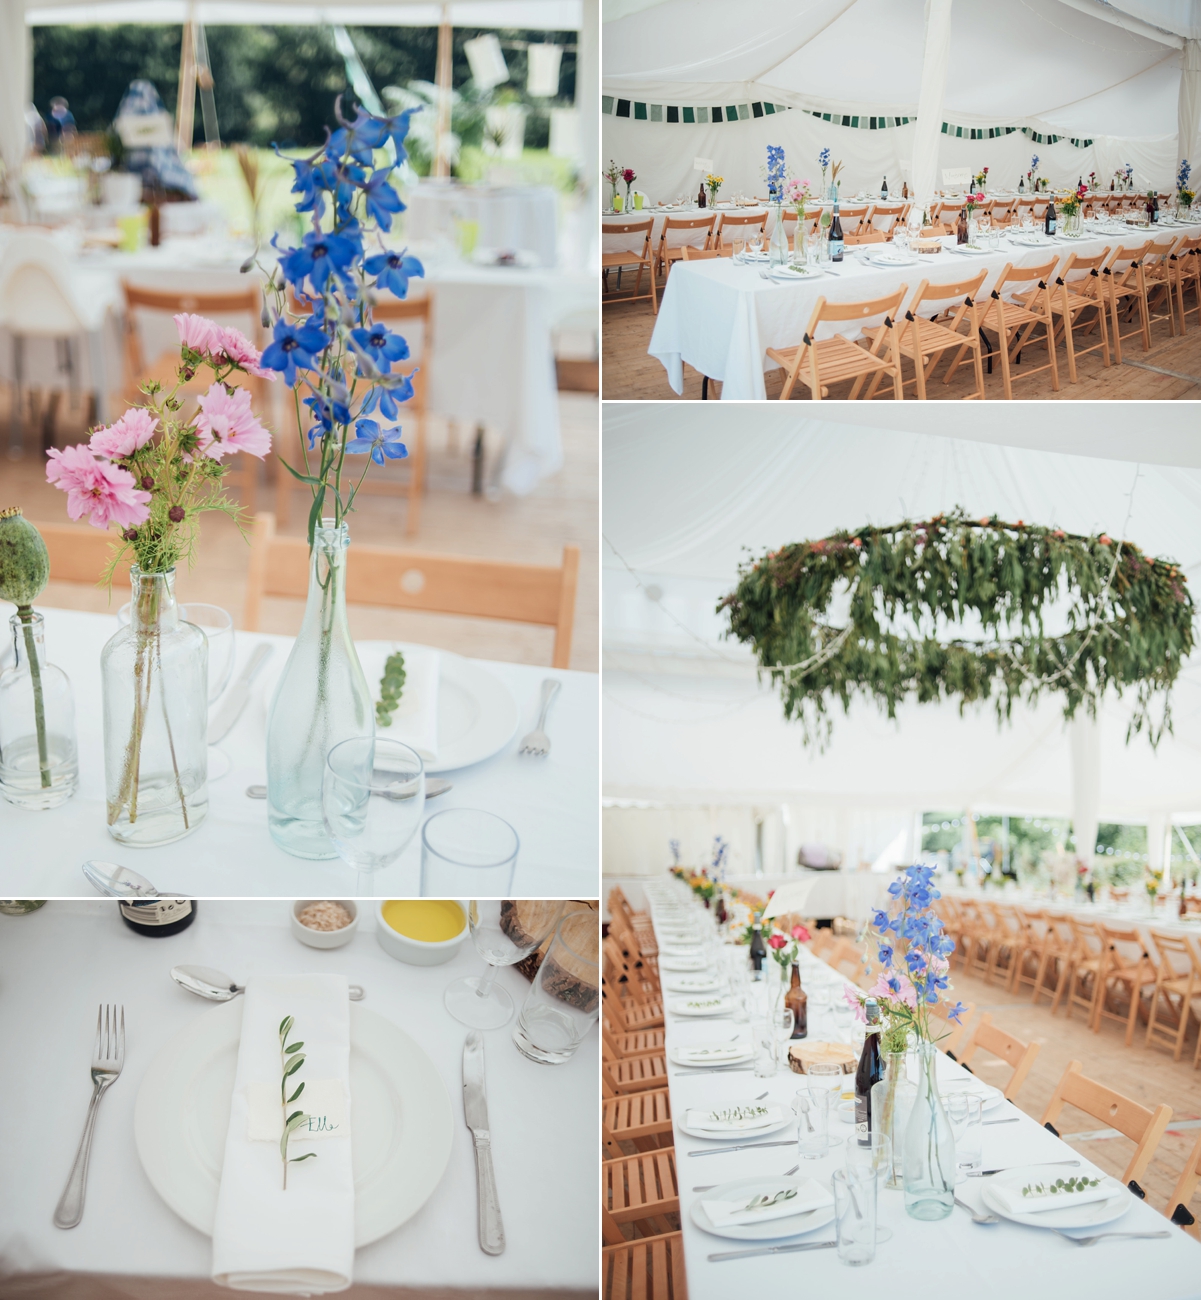 5 A handmade and natural outdoor wedding in Devon